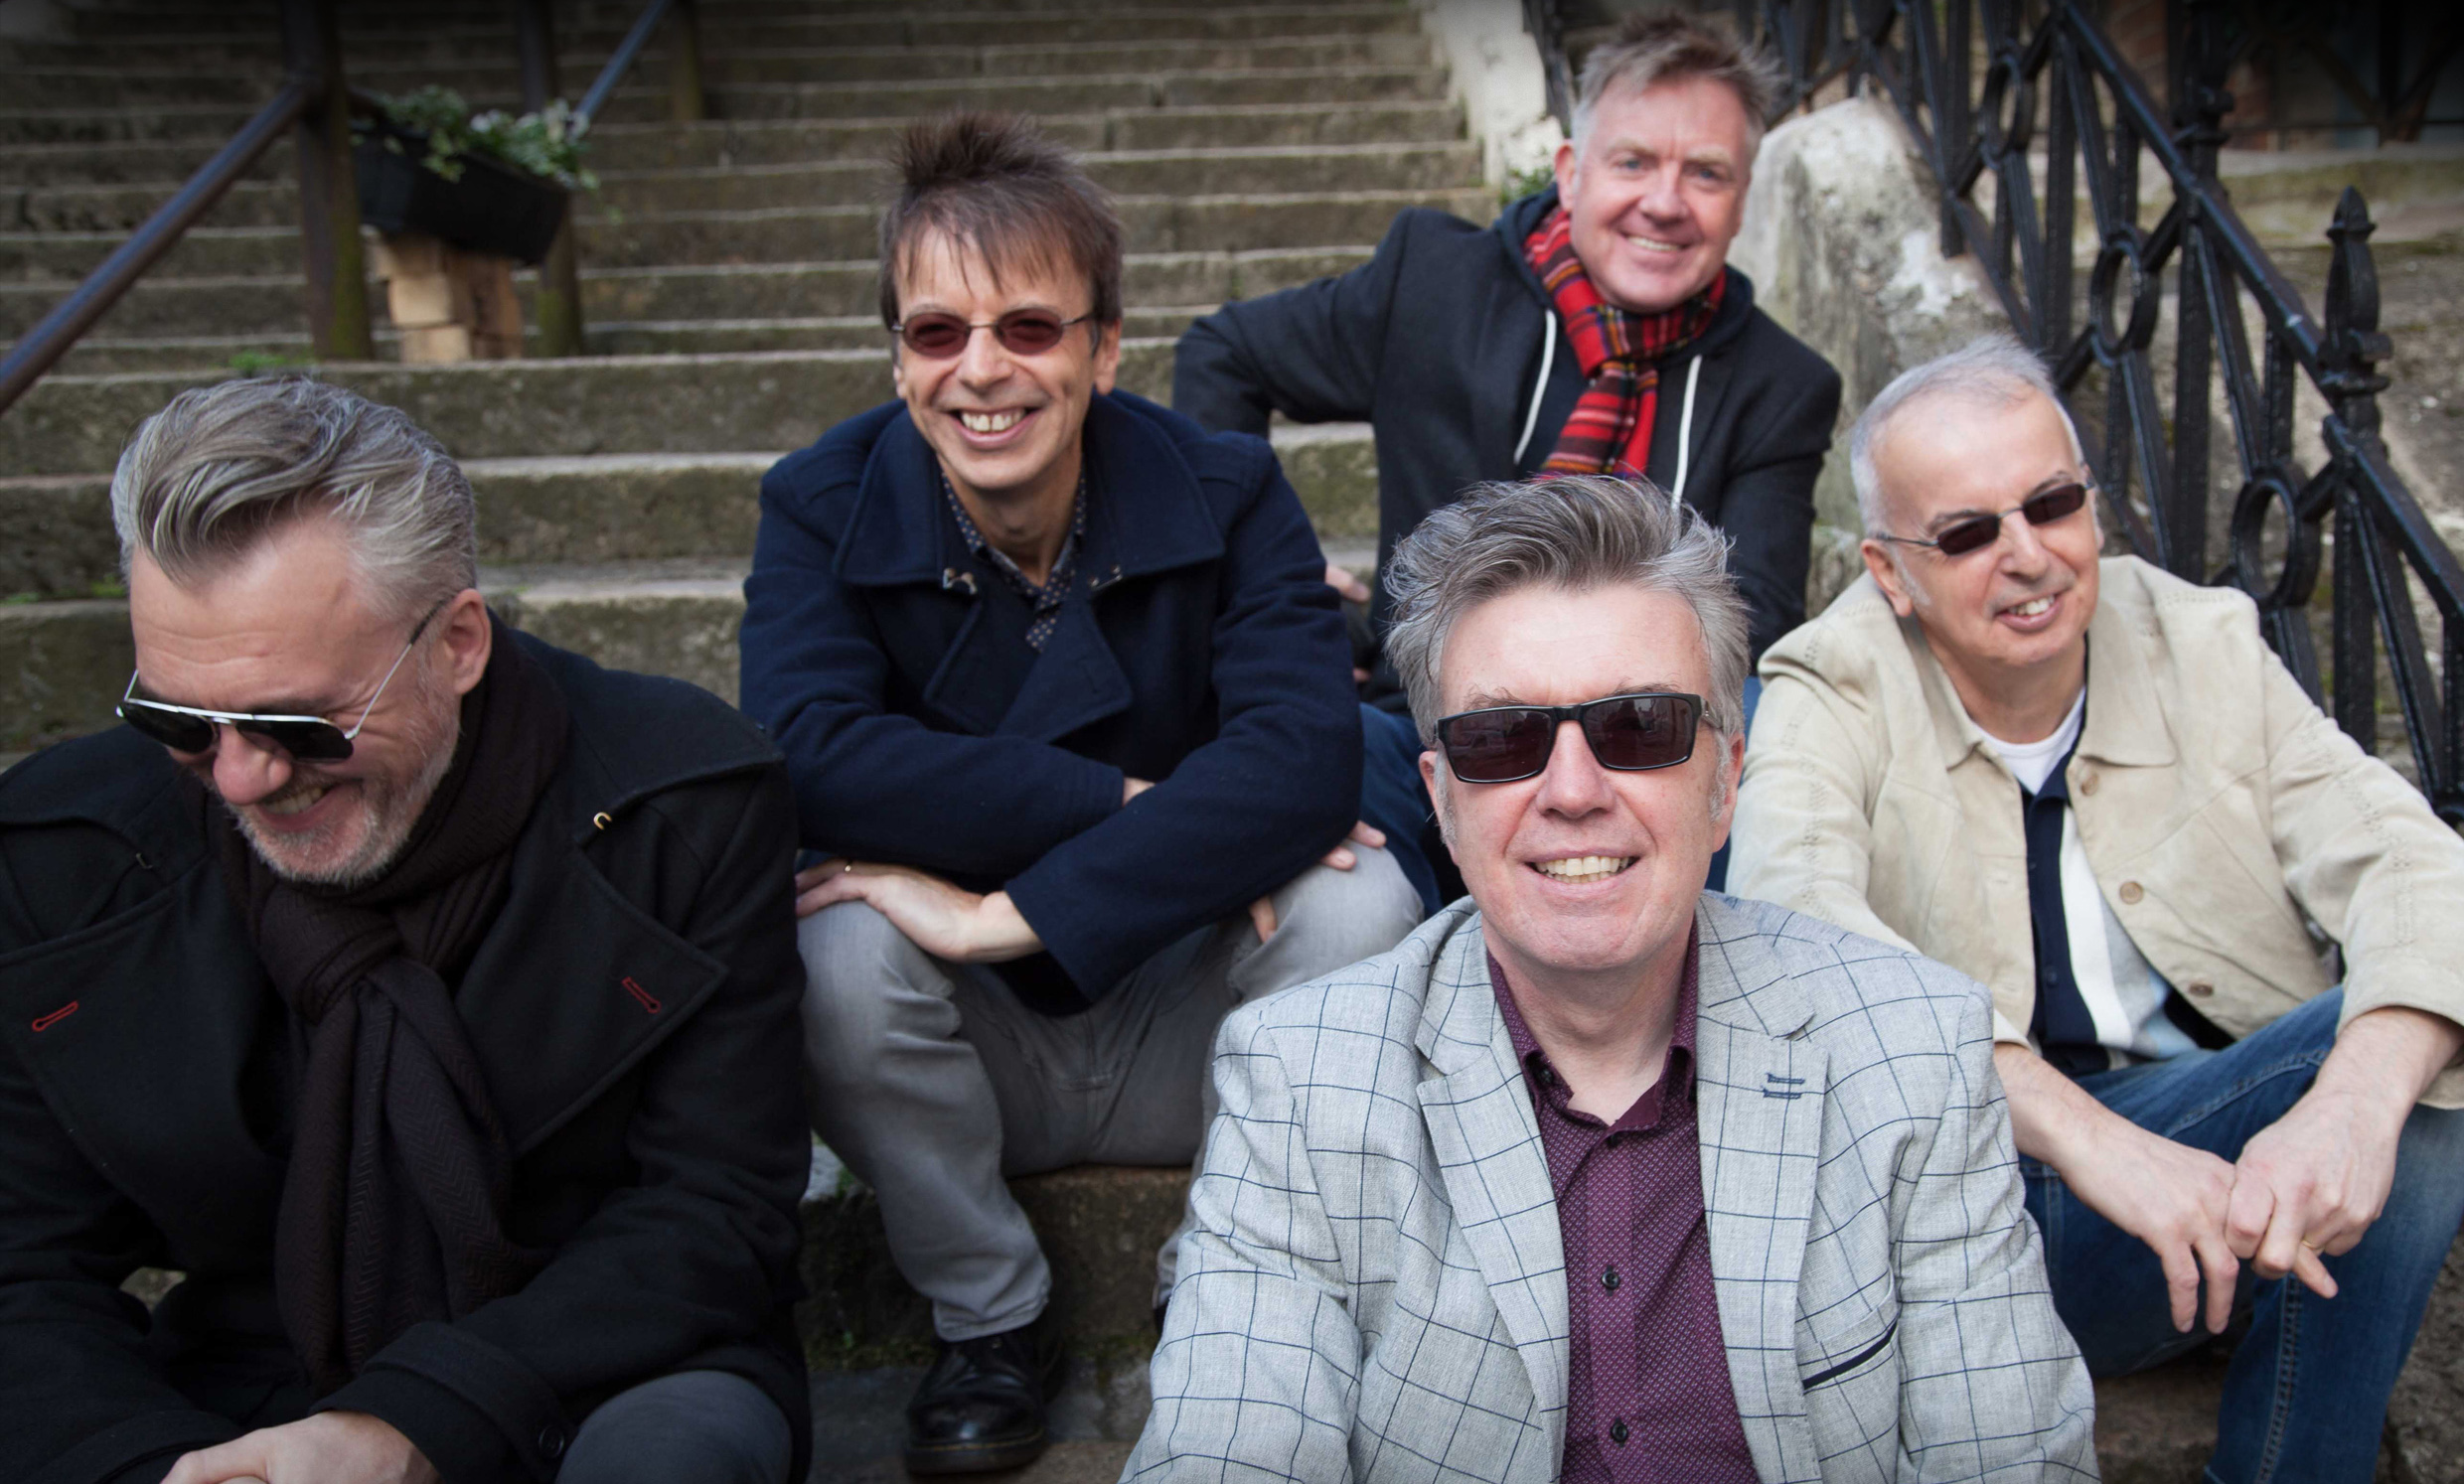 THE UNDERTONES announce headline Belfast show at Limelight 2 on Saturday, December 18th 2021 1